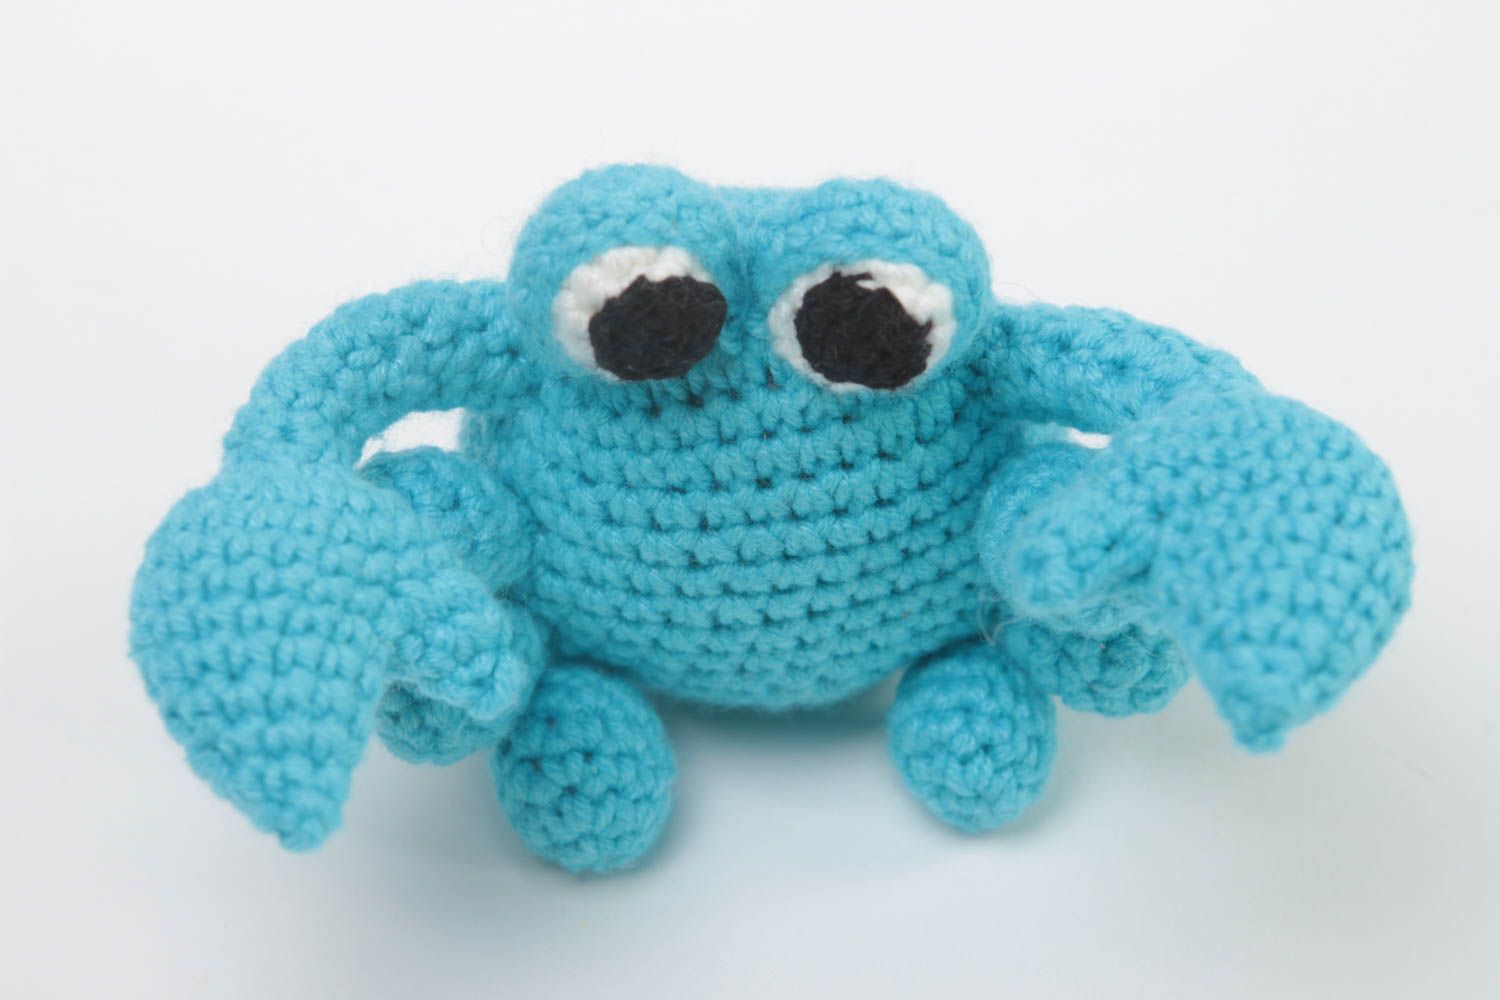 Cute handmade crochet toy soft toy for kids stuffed toy birthday gift ideas photo 2